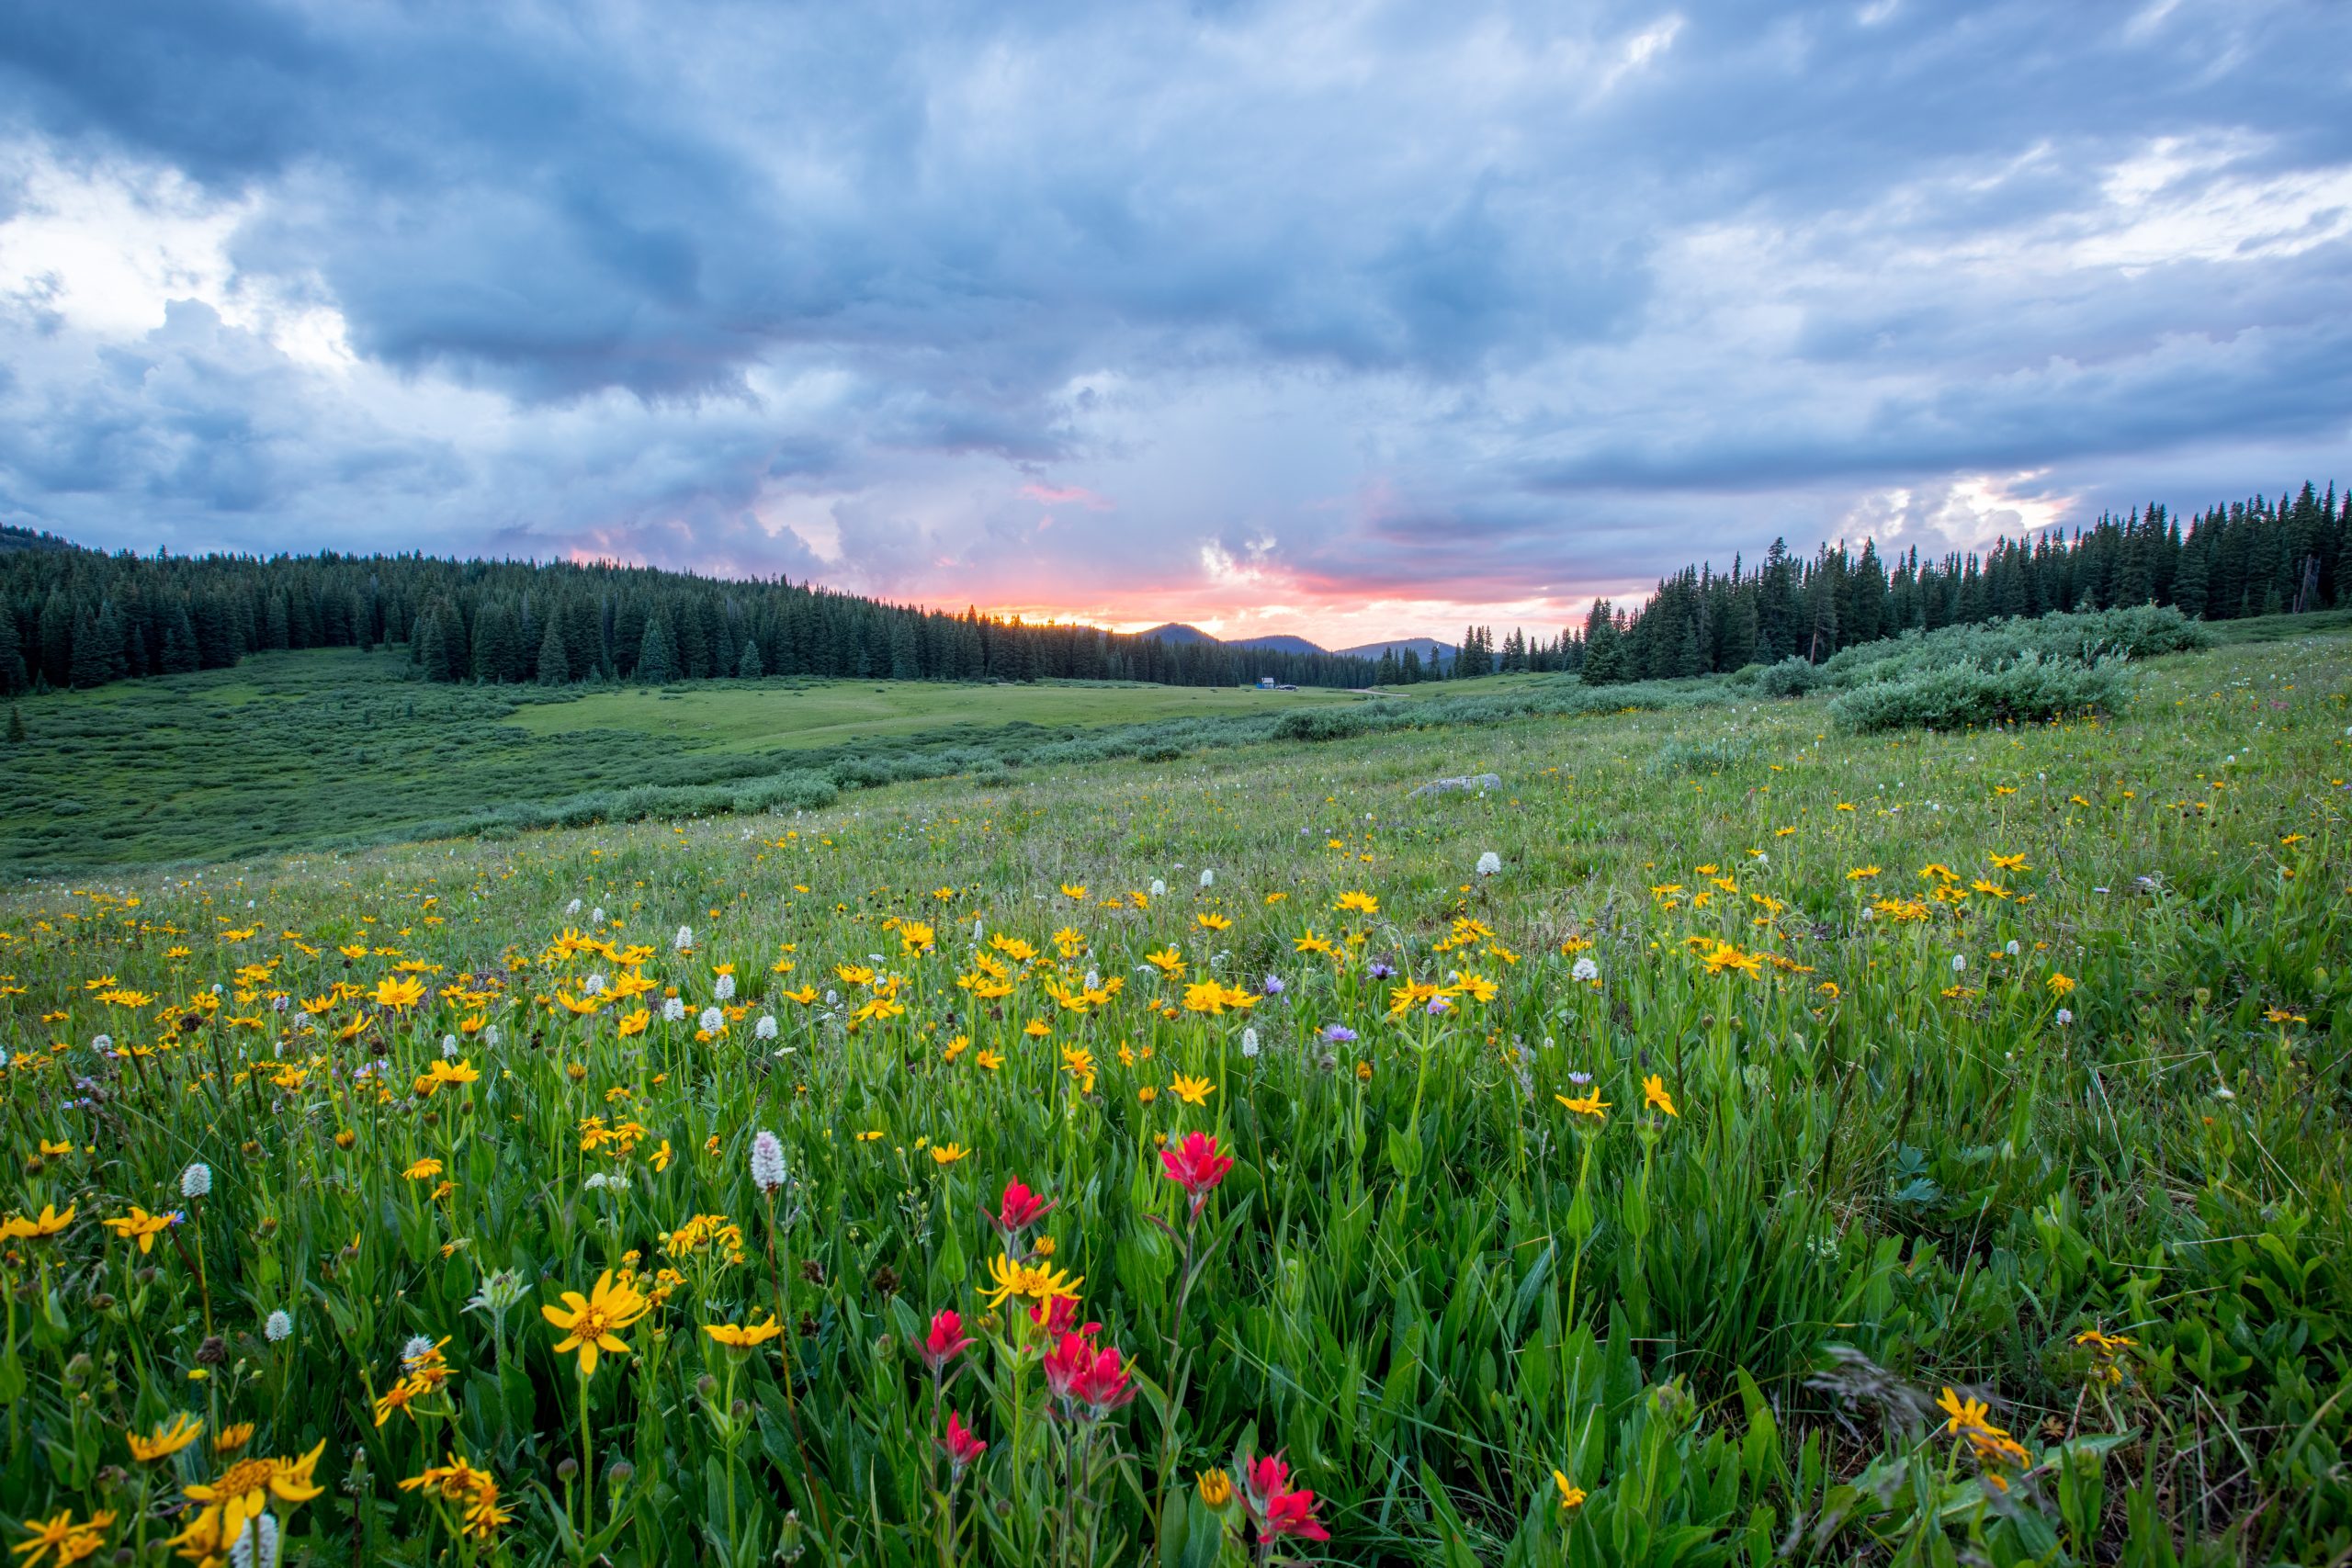 Flowers in field with pine trees and sunset in distance